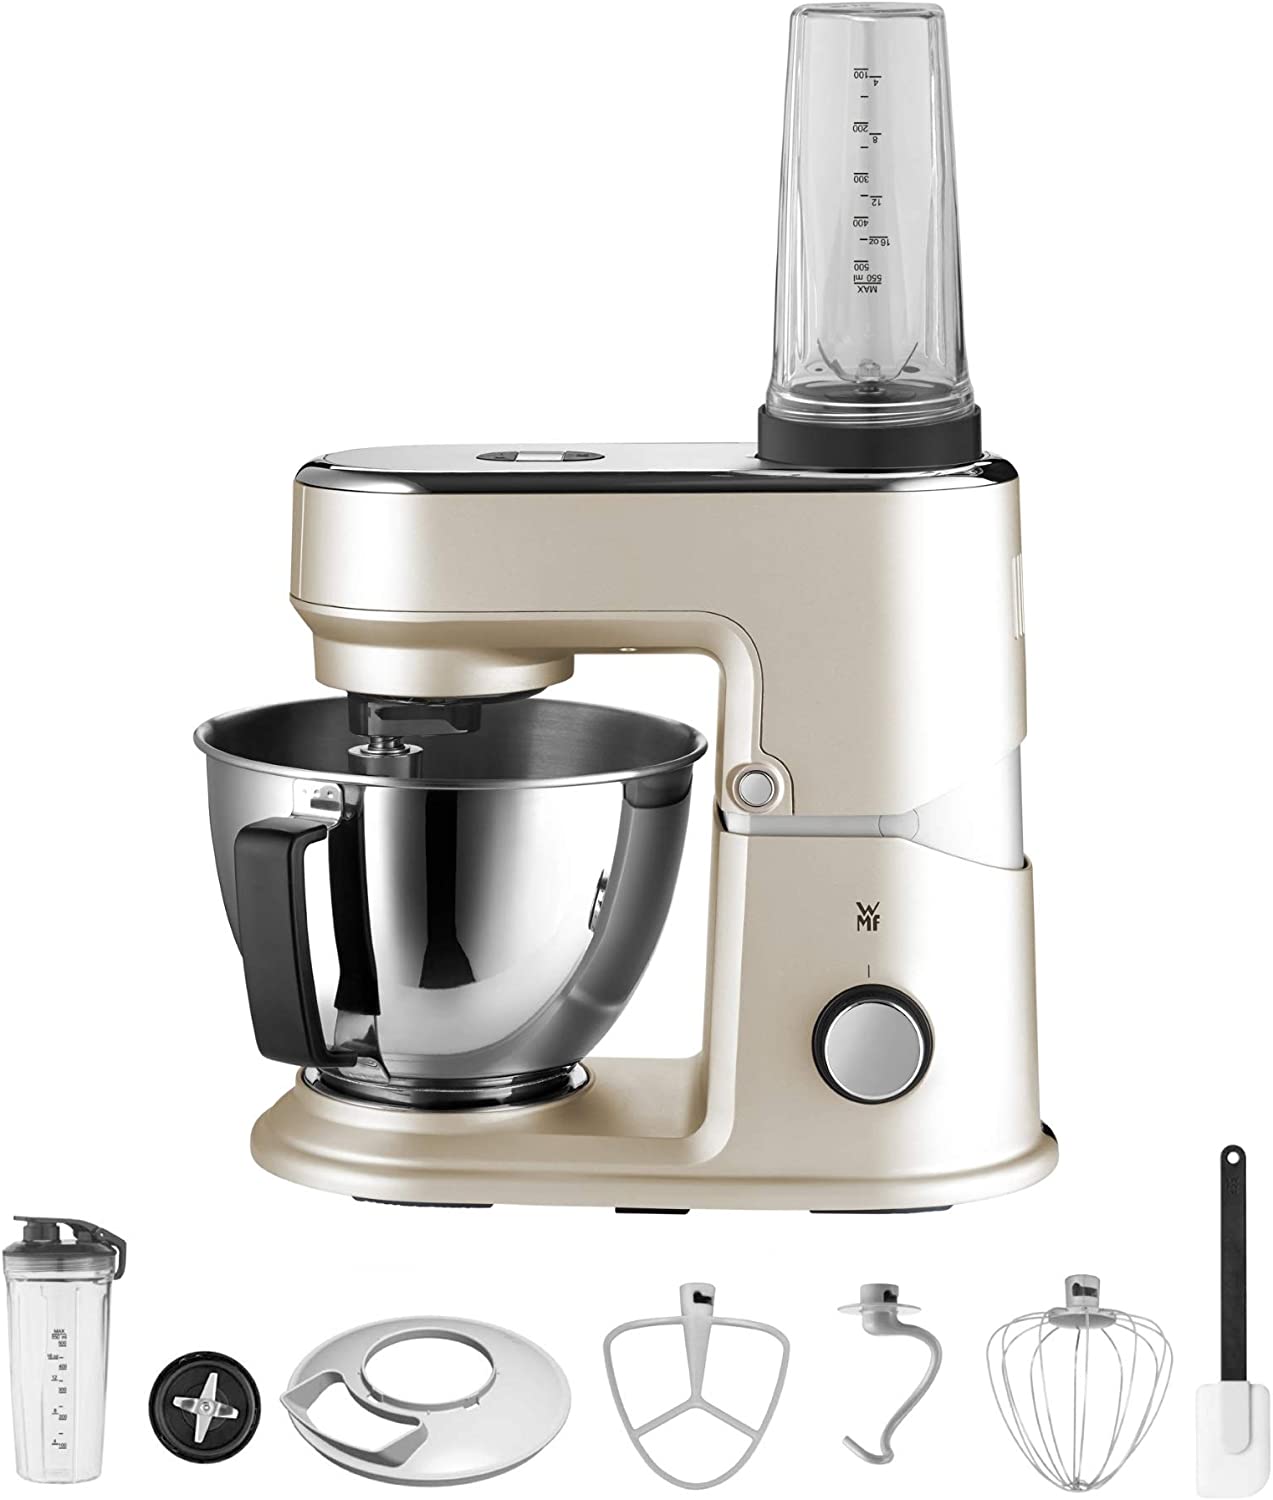 WMF Küchenminis Edition Mini Food Processor, Space Saving Mixer for Smoothies, 3L Bowl, Soft Start, Planet Mixer, 8-Stage Kneading Machine, 3 Mixing Tools, 43 W, Matte Stainless Steel, Beige